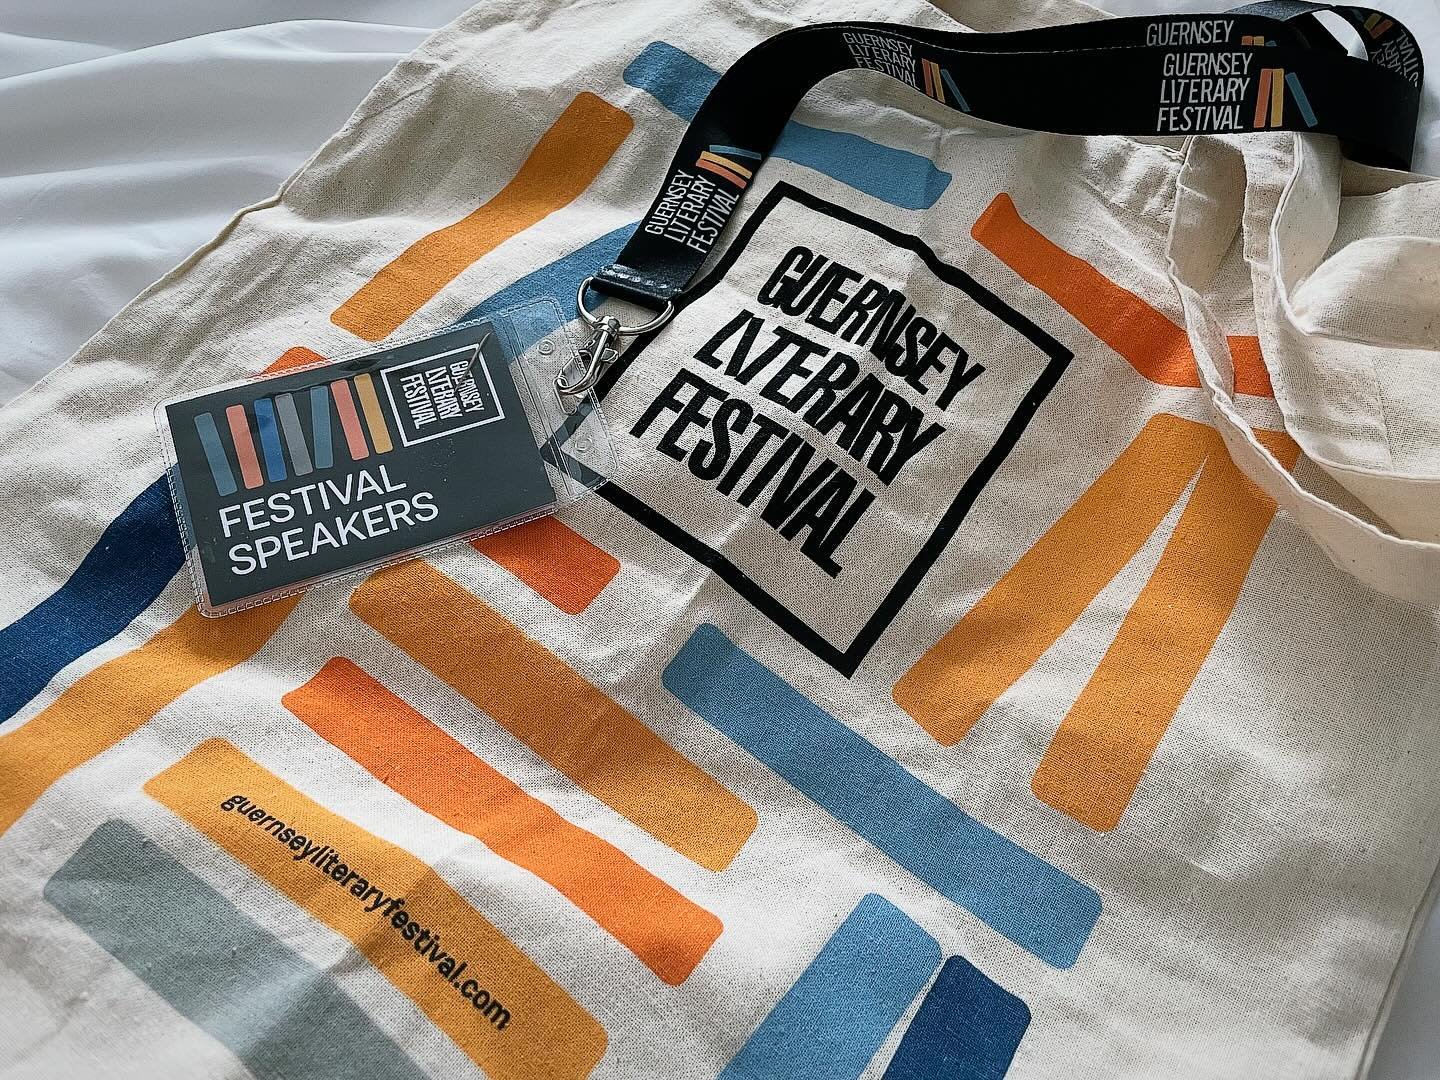 Such a pleasure to be part of @guernseylitfest this year! A whirlwind tour - a keynote at the launch event (my love letter to books in between speeches by the wonderful Sir Terry Waite and ex-footballer Pat Nevan), school events, a library event and 